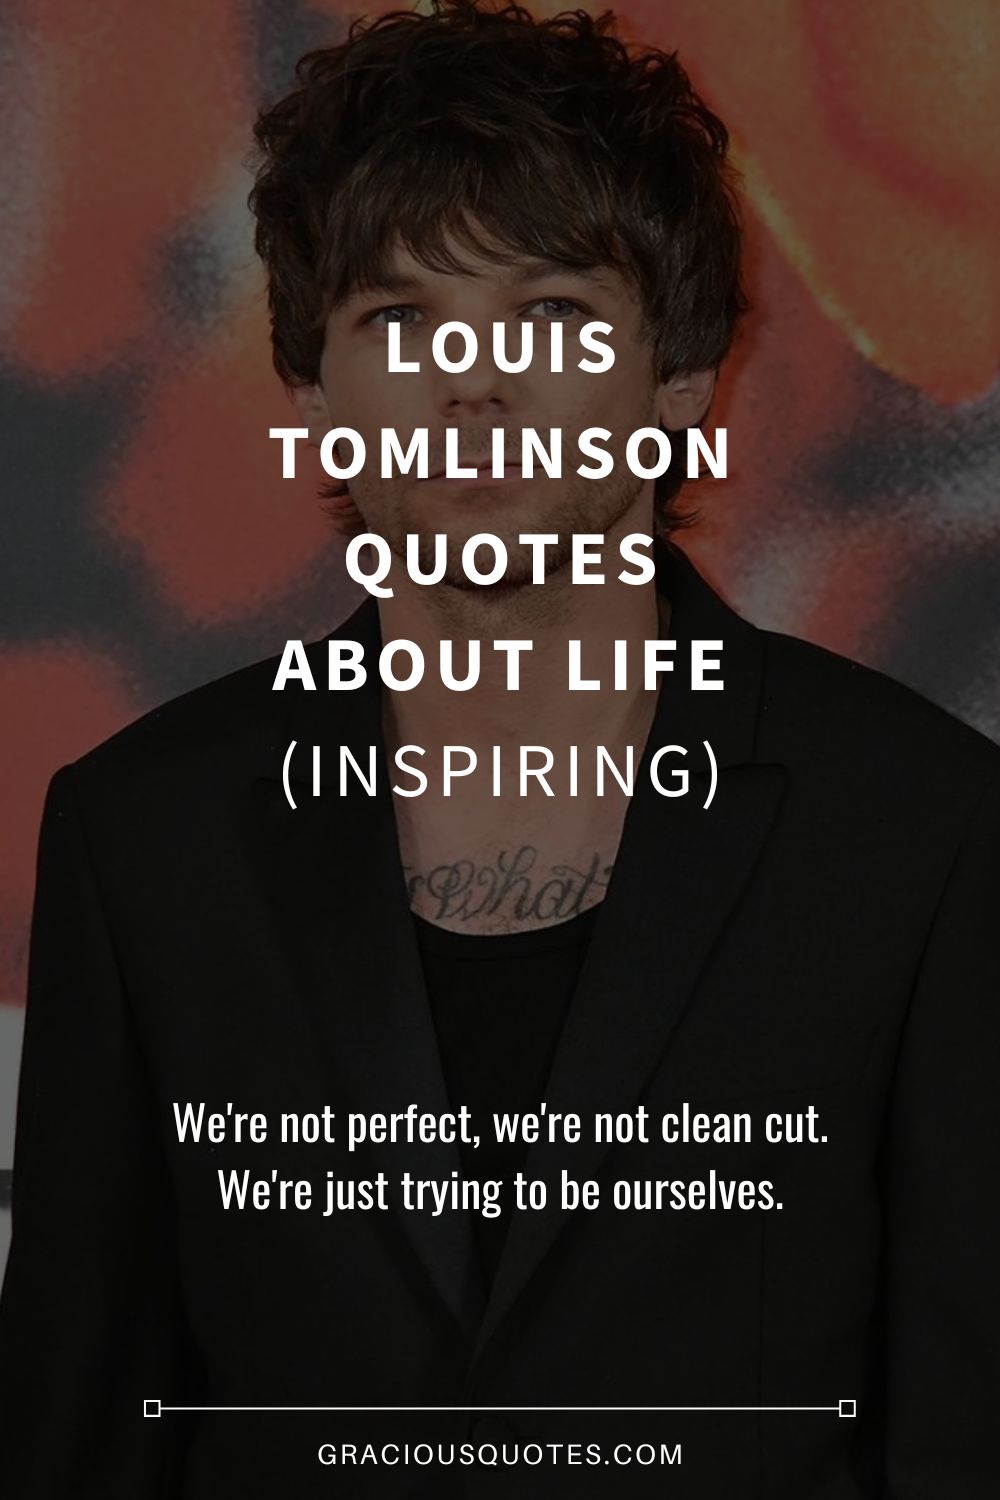 Louis Tomlinson Quotes About Life (INSPIRING) - Gracious Quotes